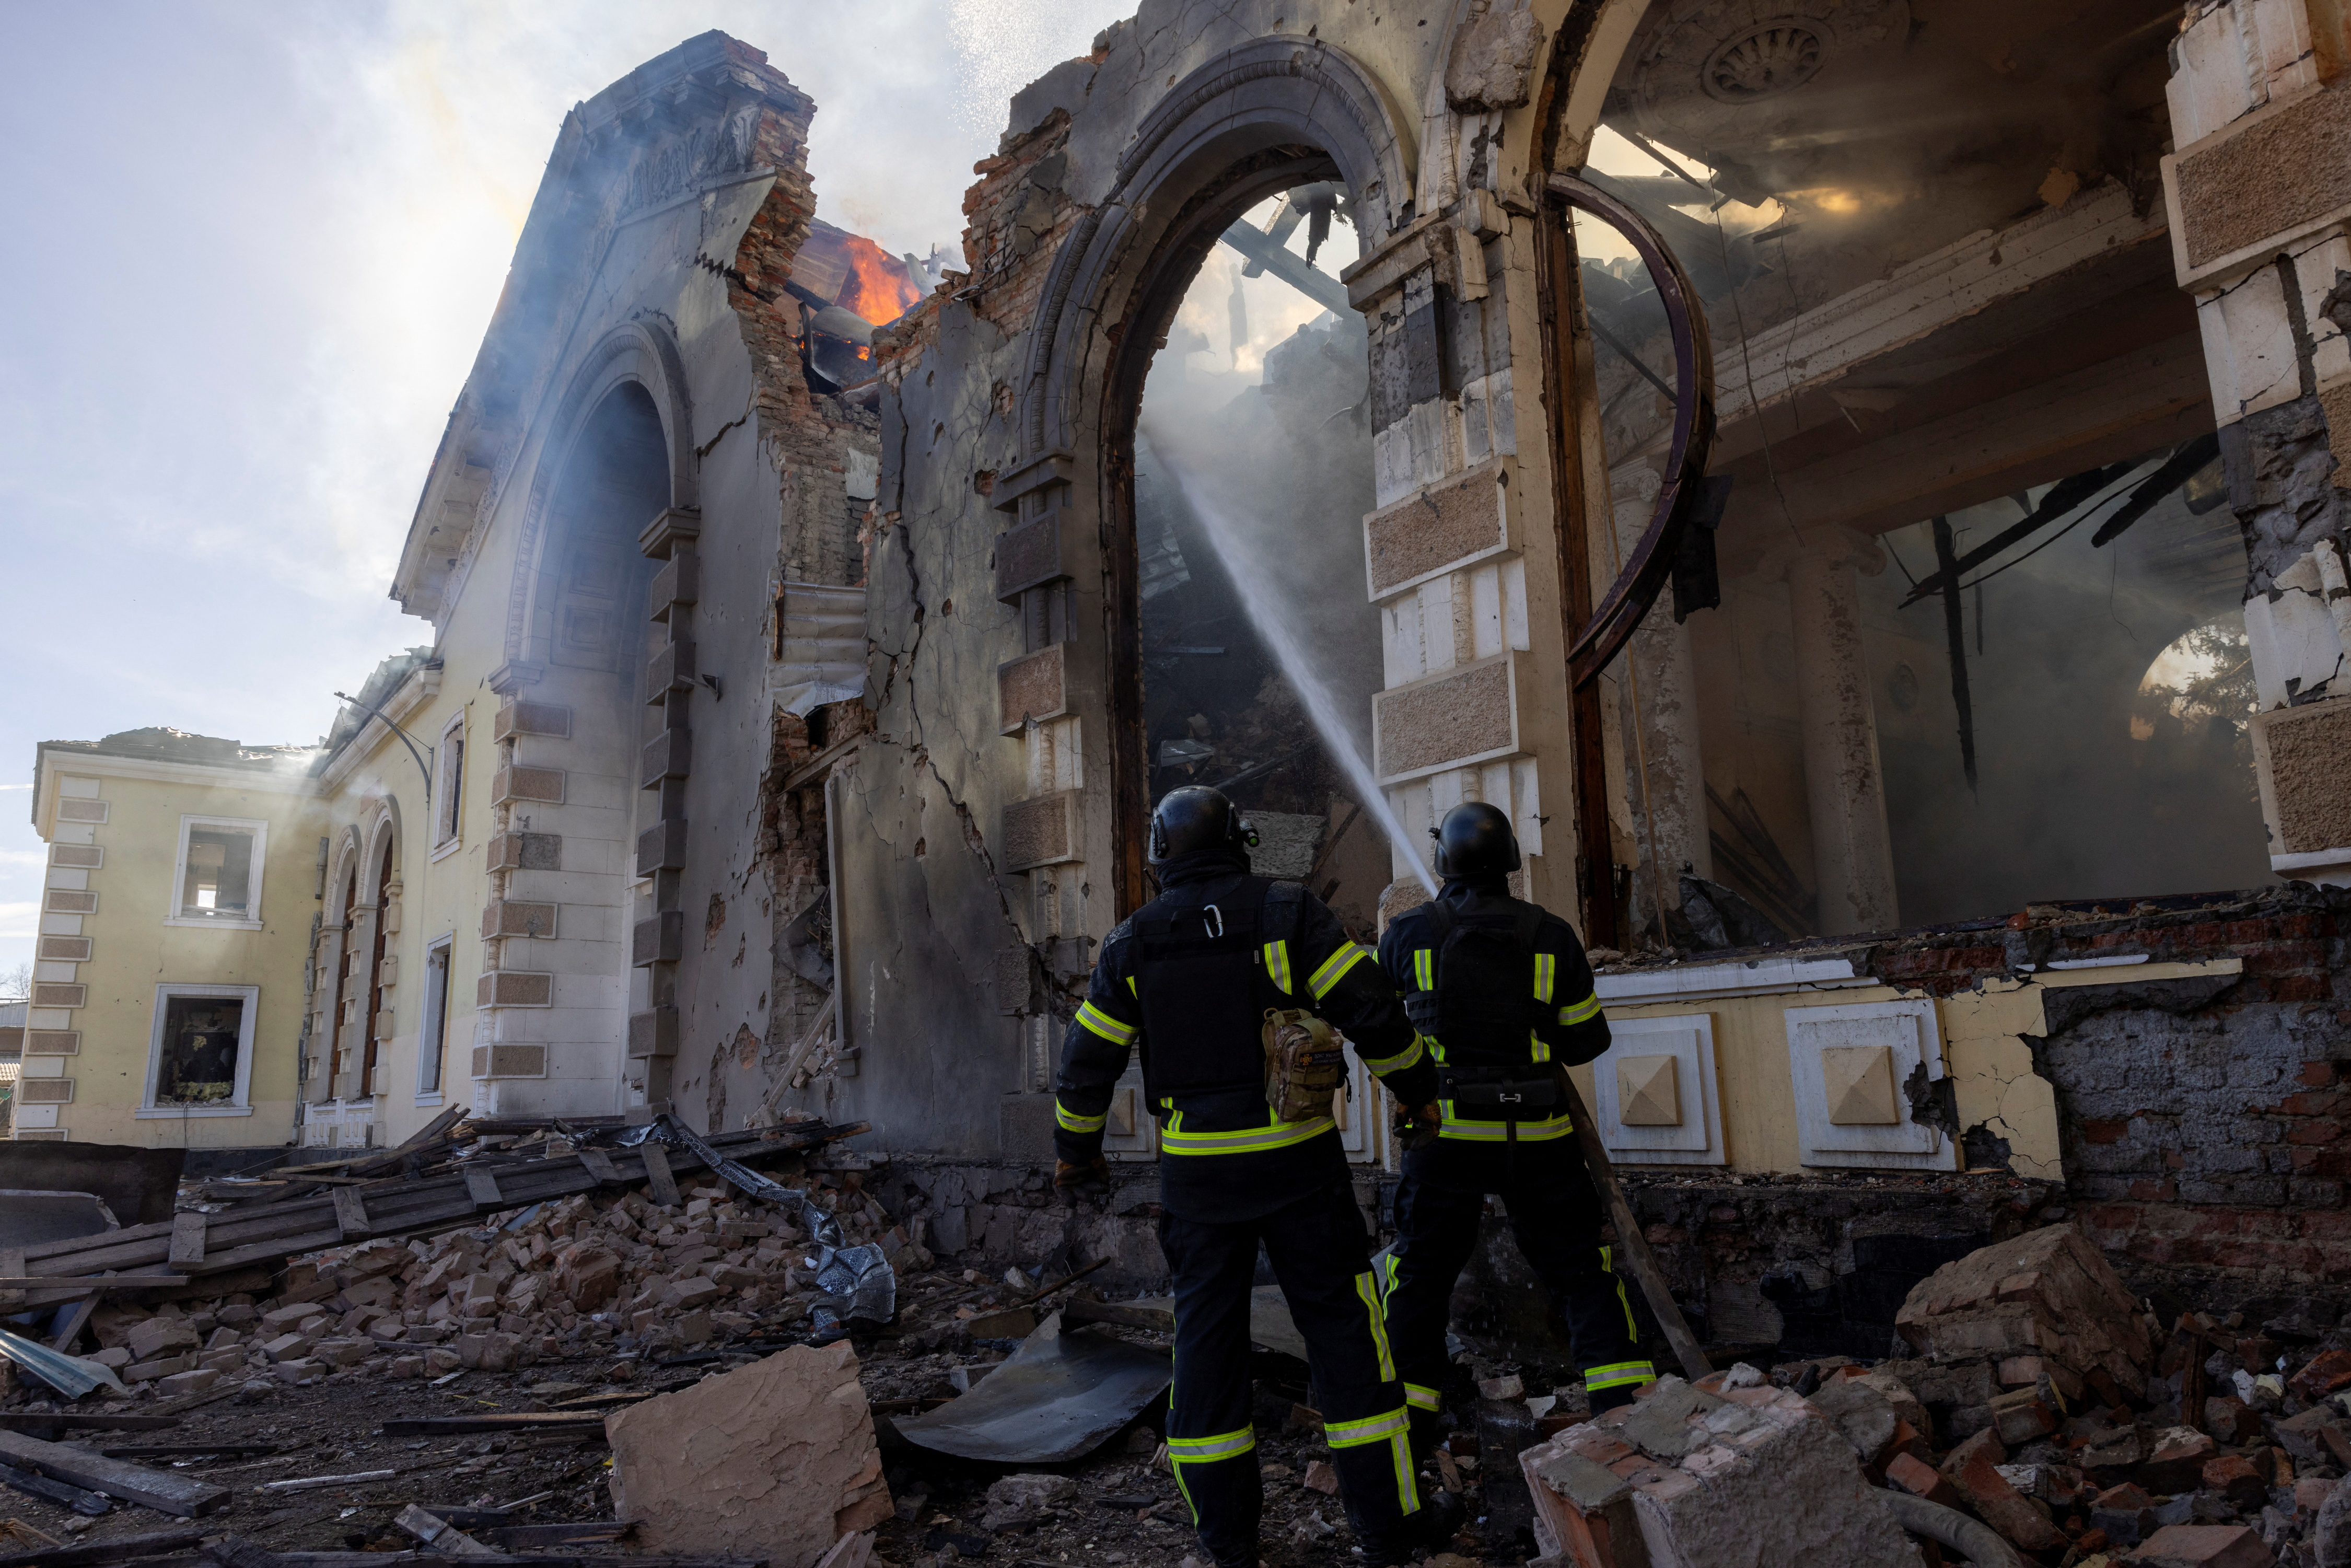 Firefighters work at the scene of a Russian missile strike that destroyed a train station in Kostiantynivka, Ukraine